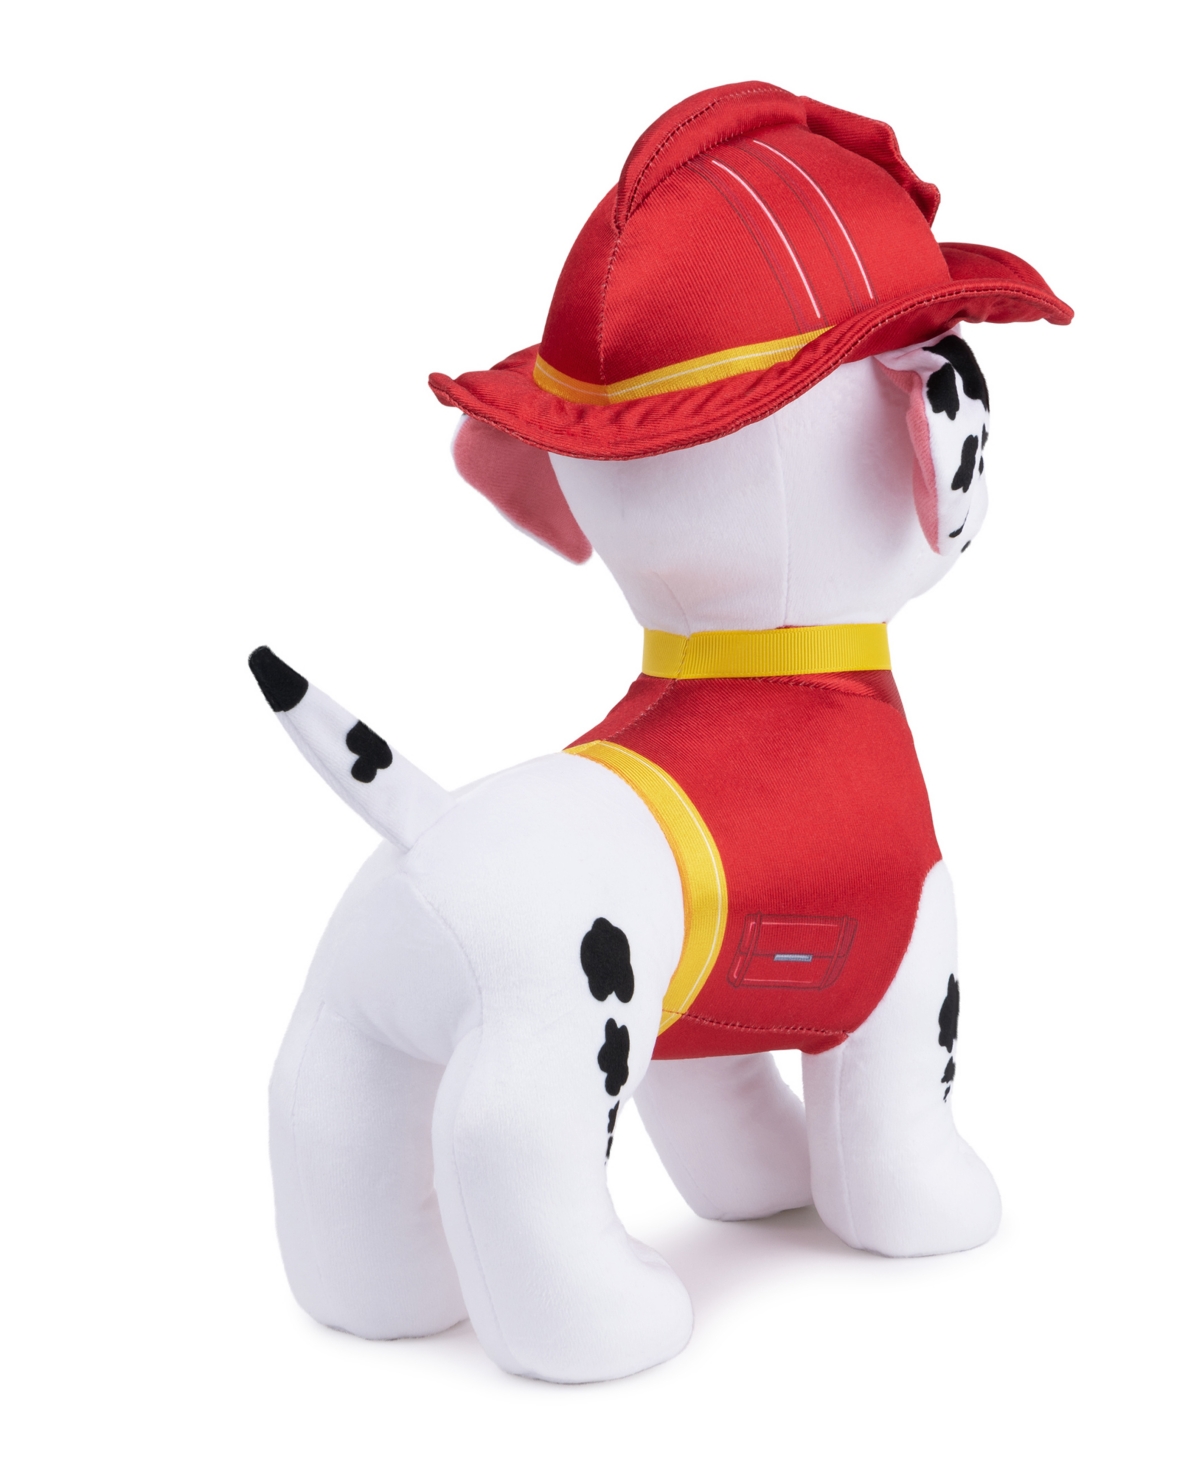 Shop Paw Patrol Marshall In Heroic Standing Position Premium Stuffed Animal Plush Toy In Multi-color